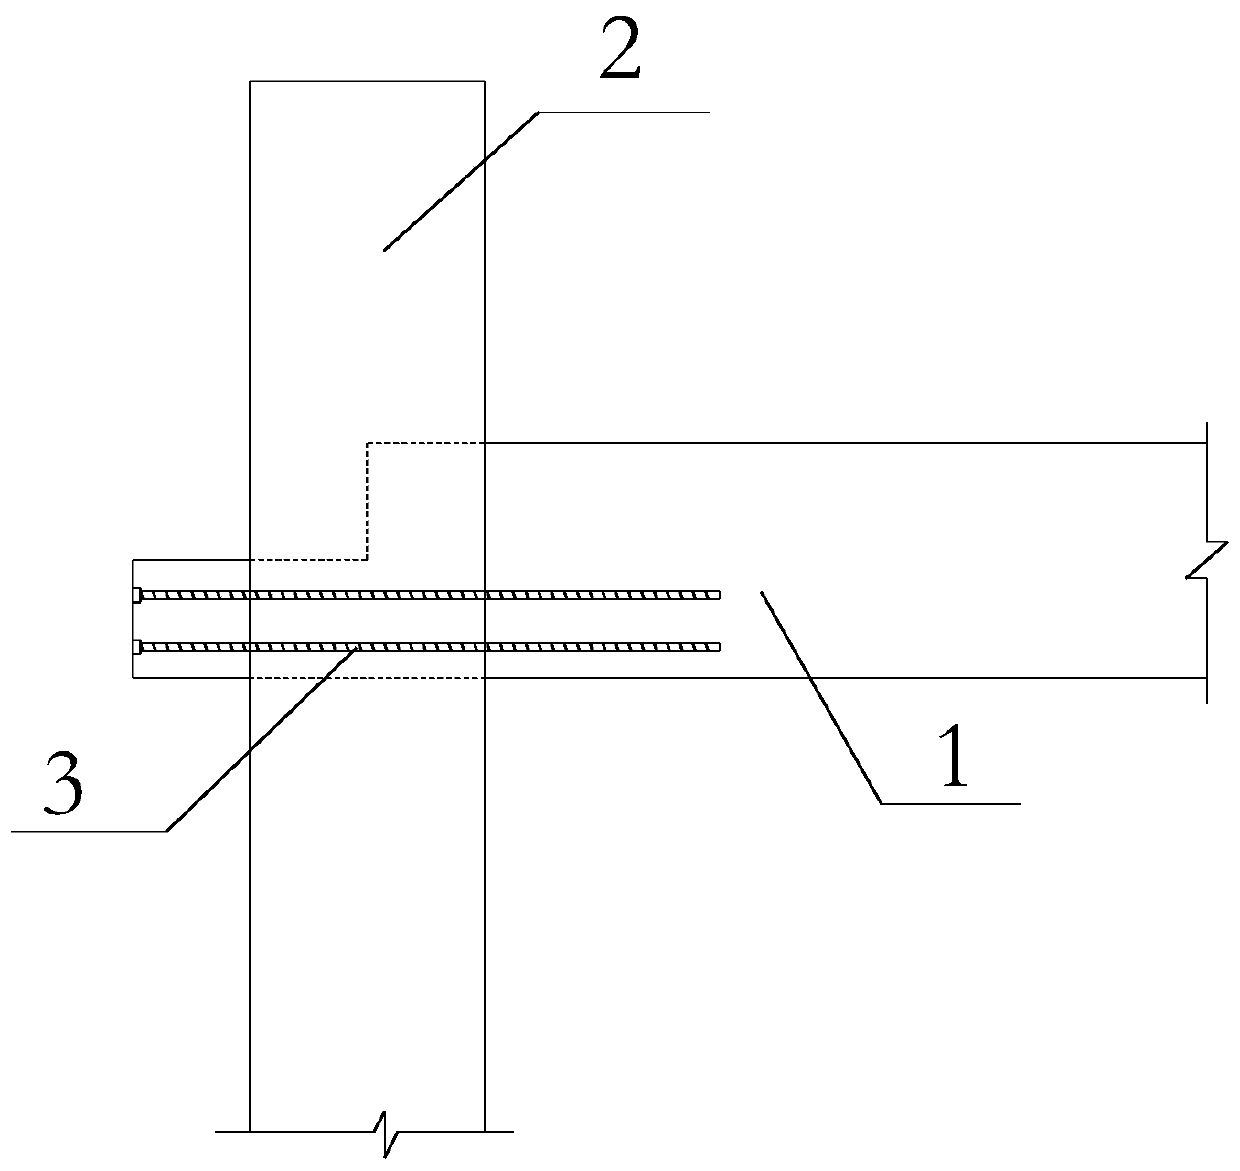 Reinforcing structure and method for damaged wood structure mortise-tenon joint